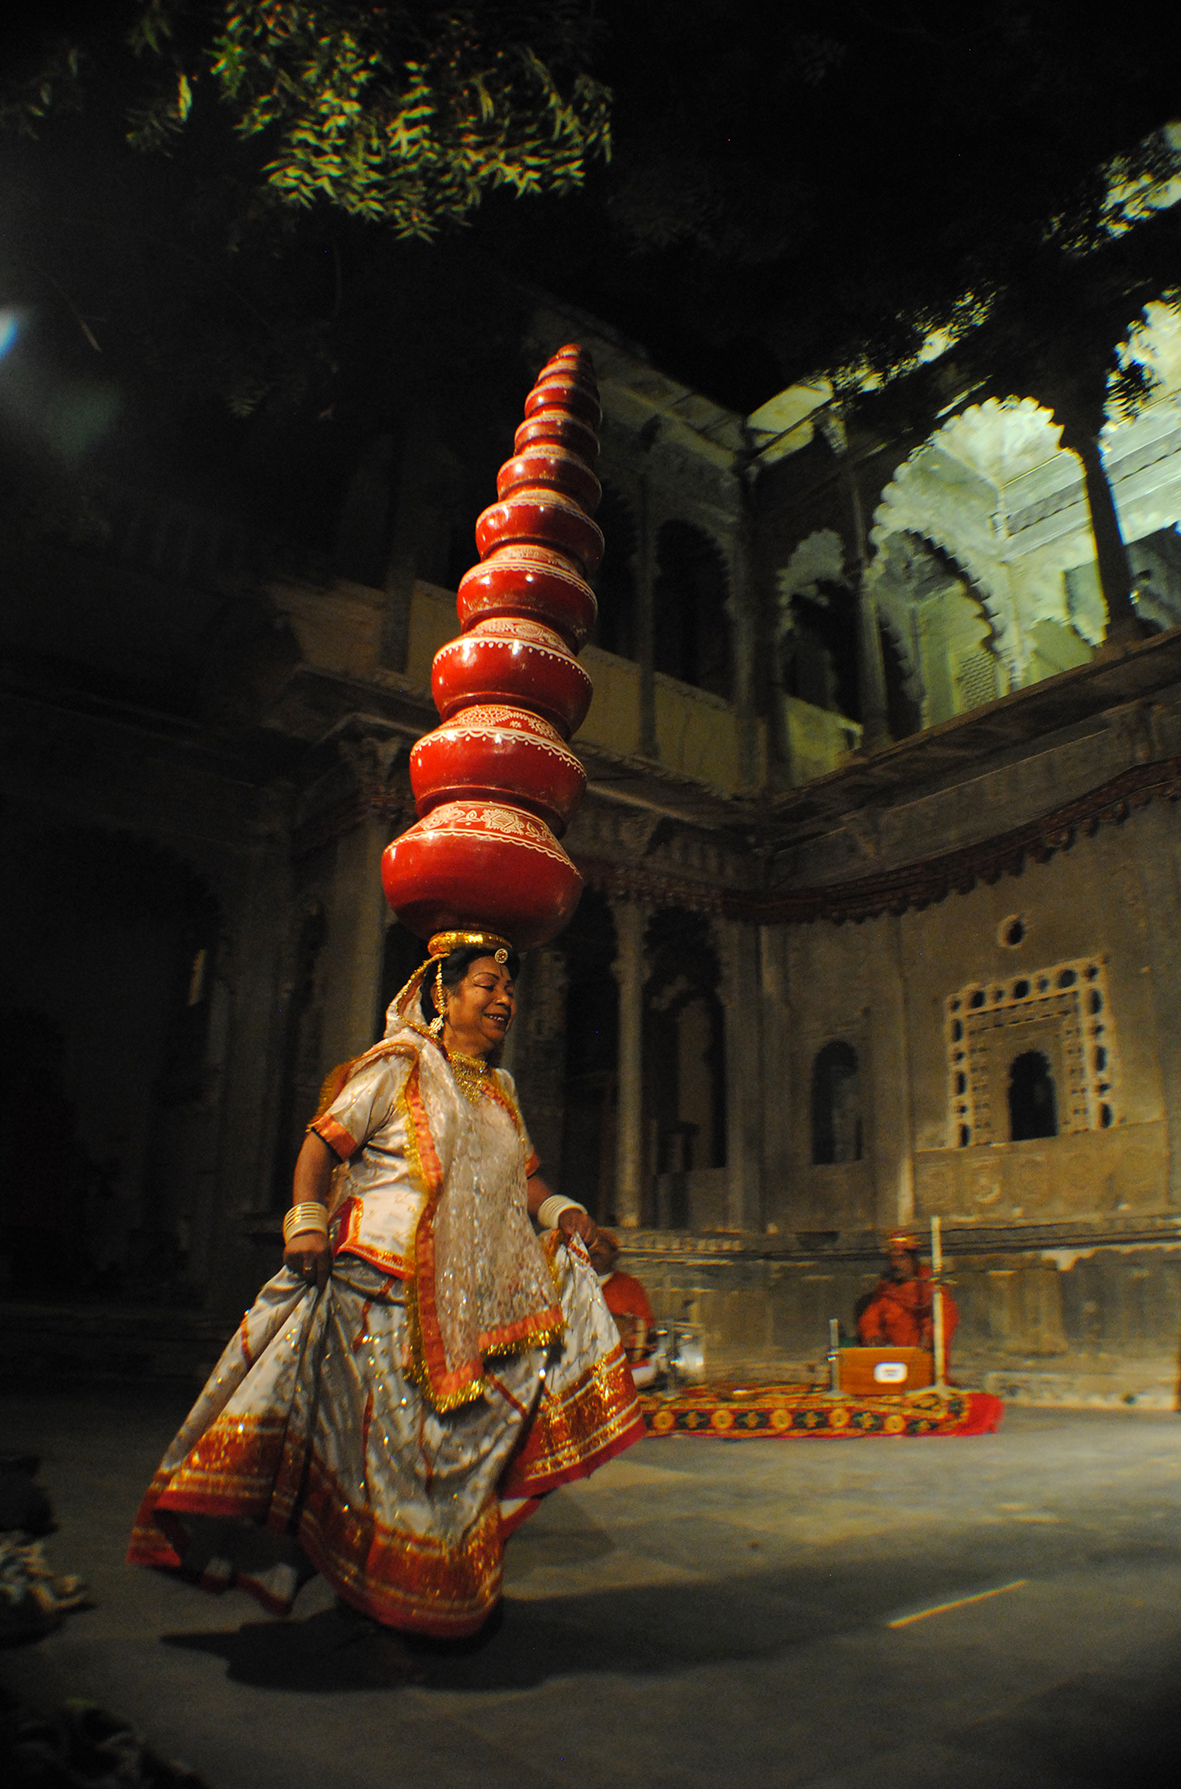 A woman performs the Bhavai, a ritualistic dance, balancing 9 earthen pots on top of her head while dancing.